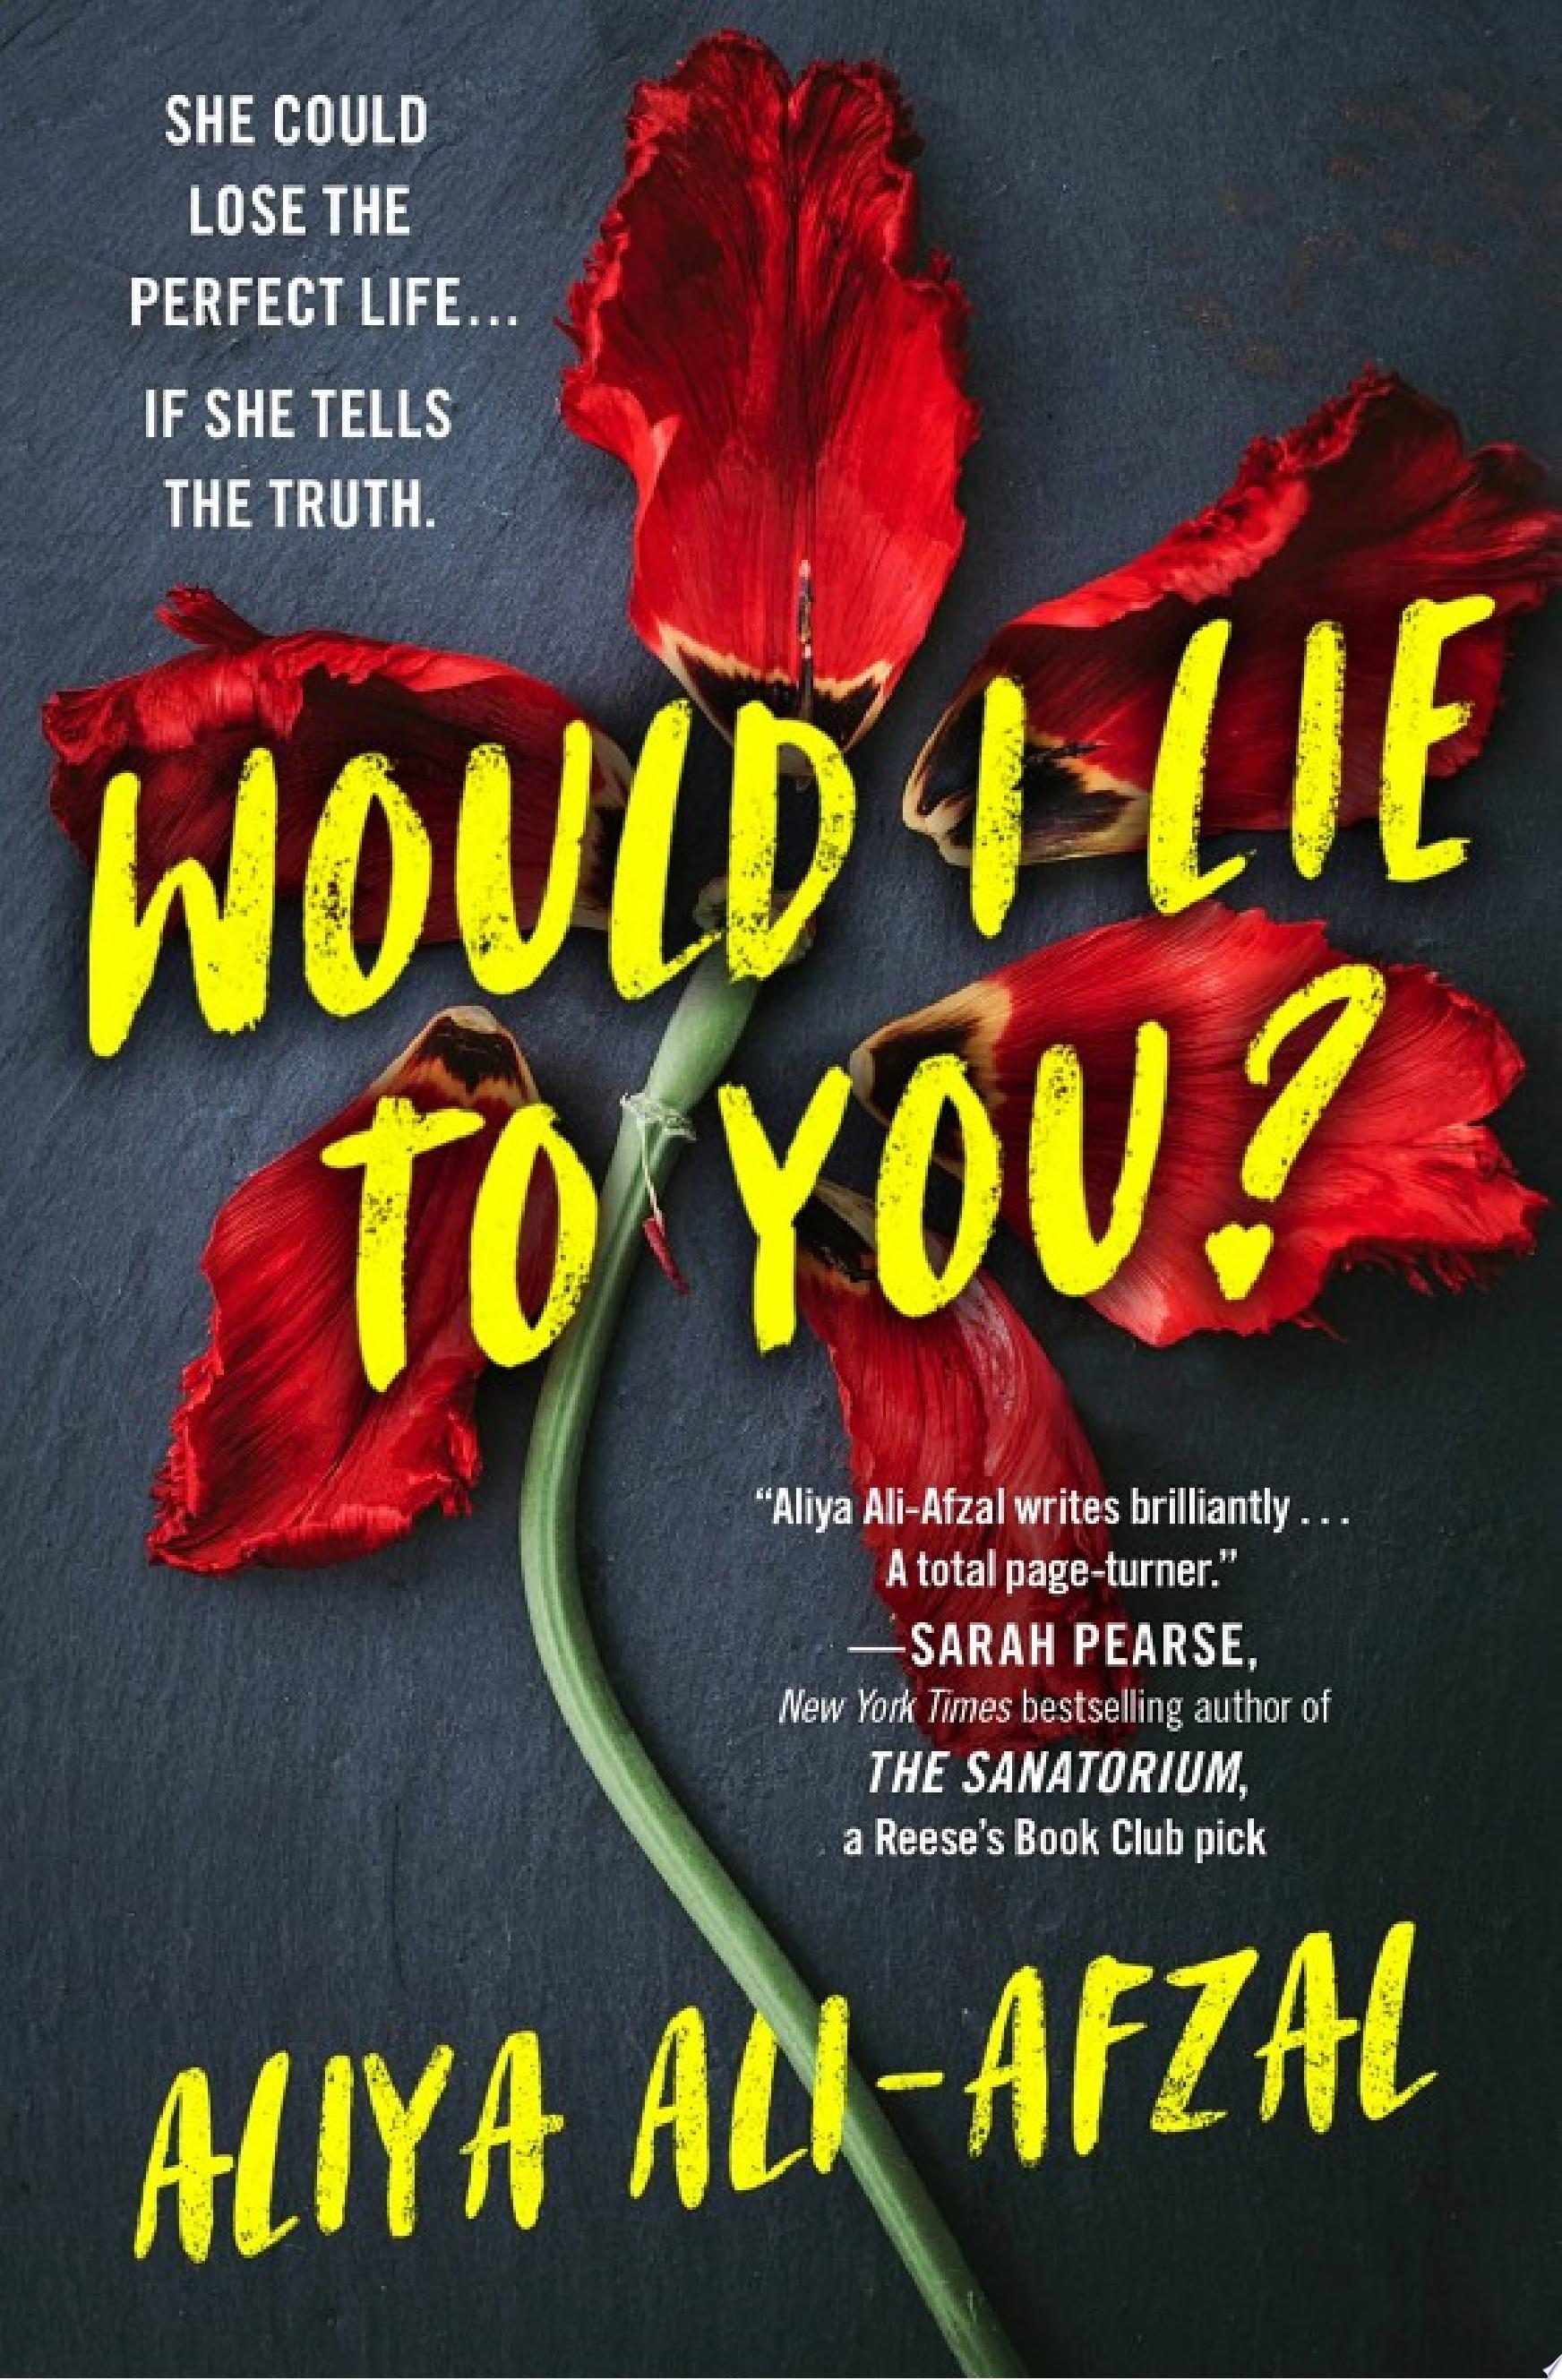 Image for "Would I Lie to You?"